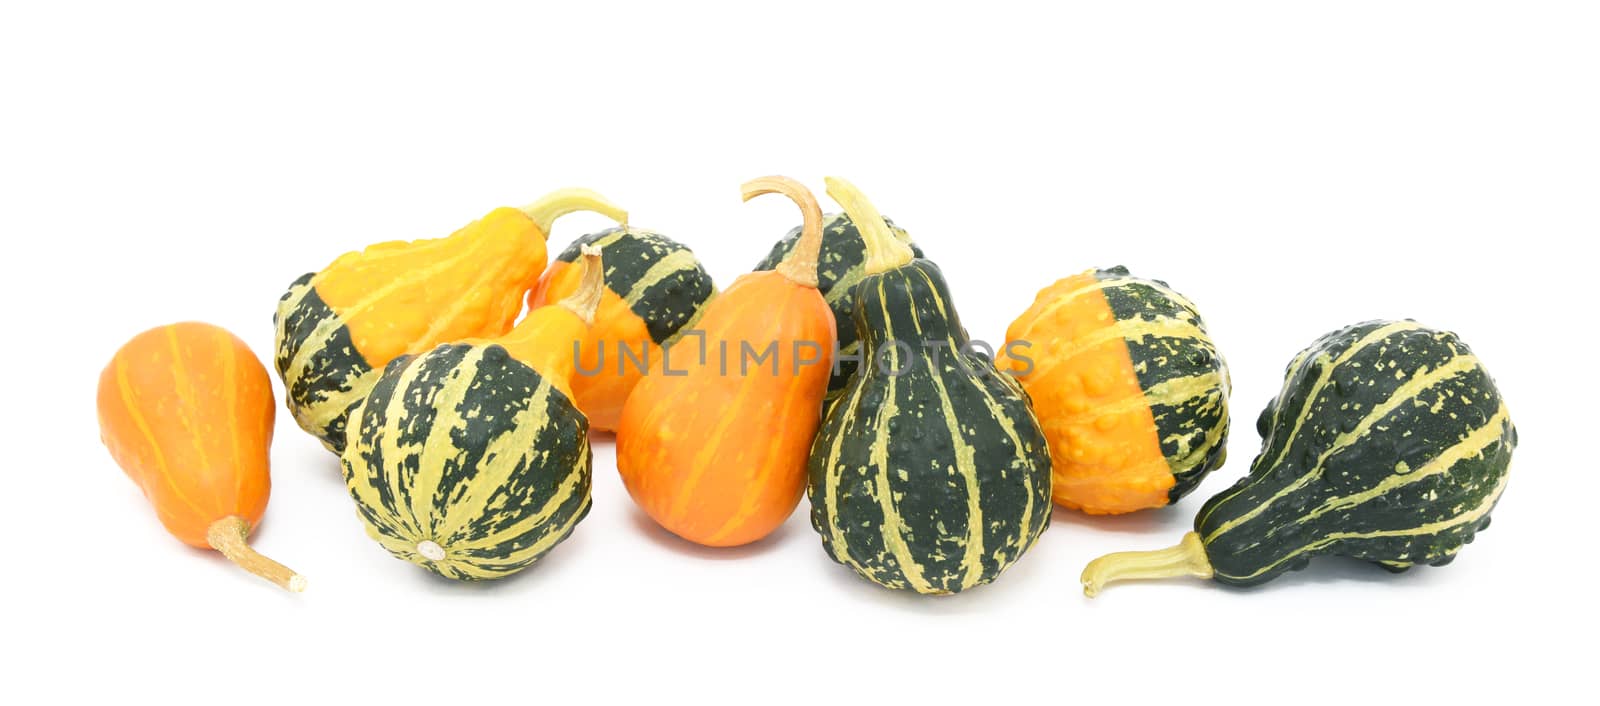 Green, orange and yellow ornamental gourds, isolated on a white background